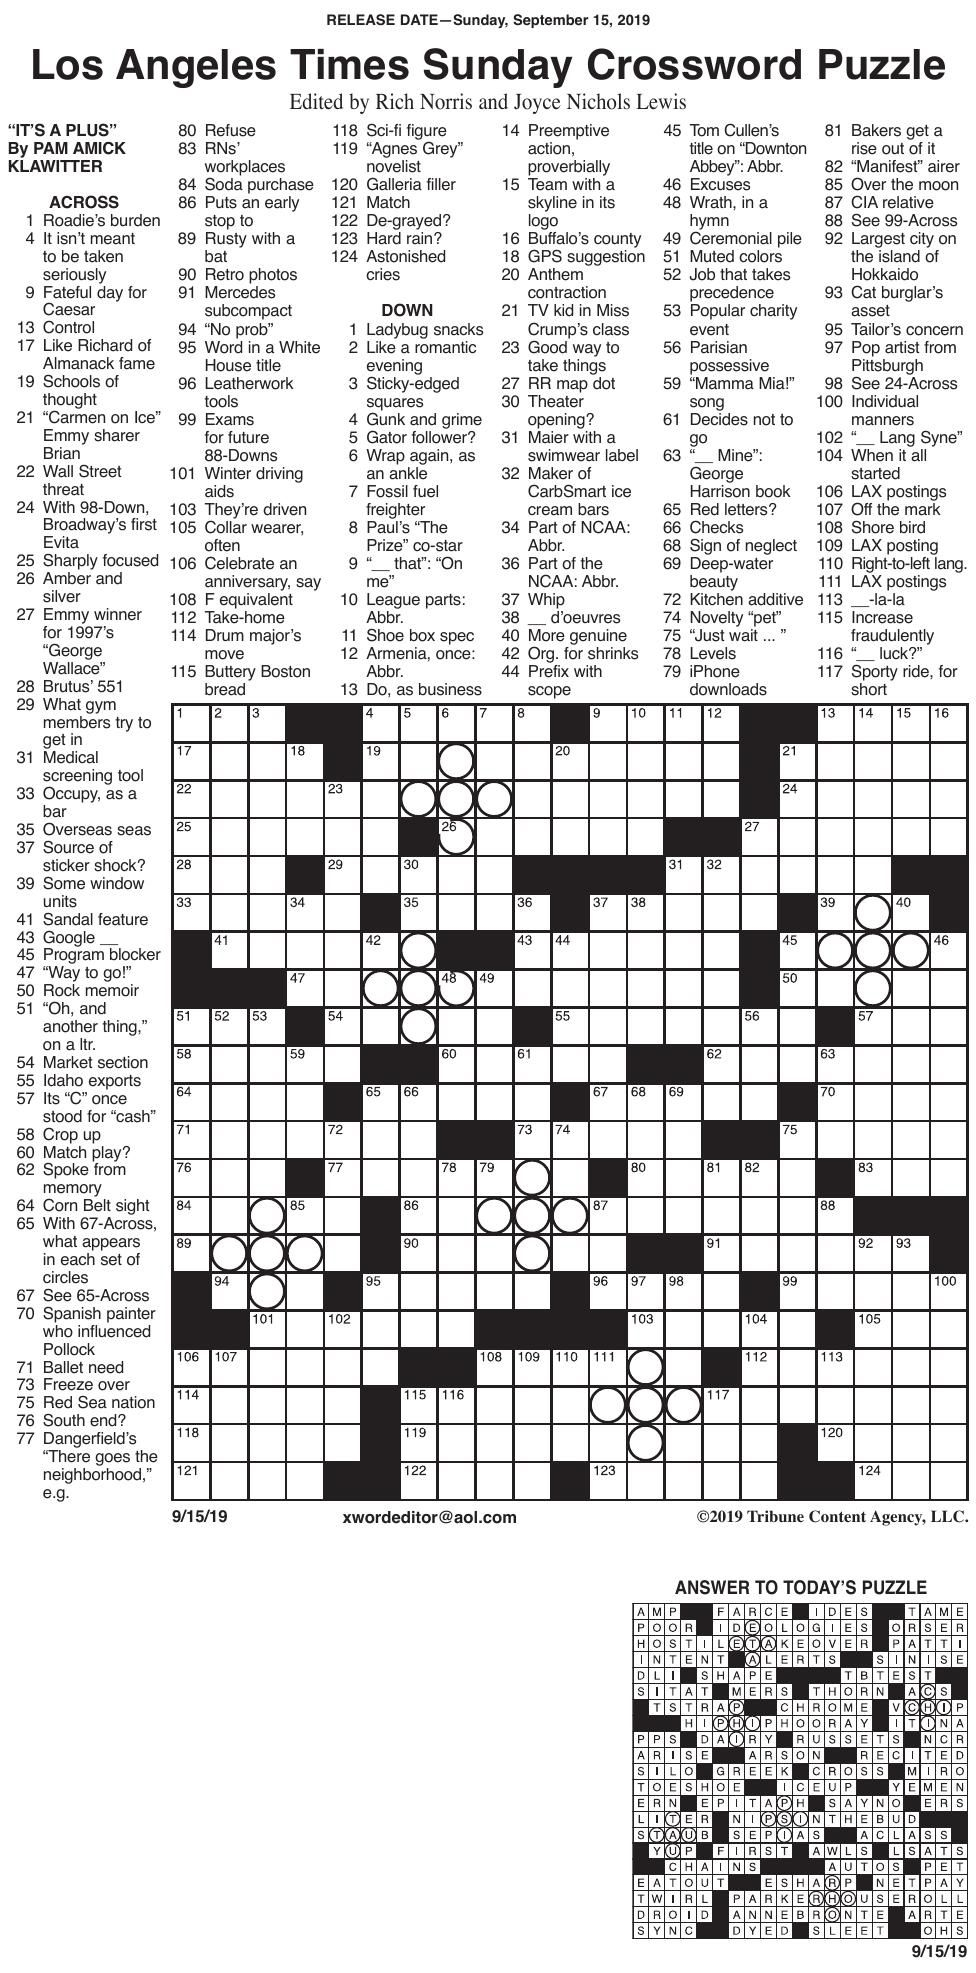 free-printable-l-a-times-crossword-puzzles-printable-crossword